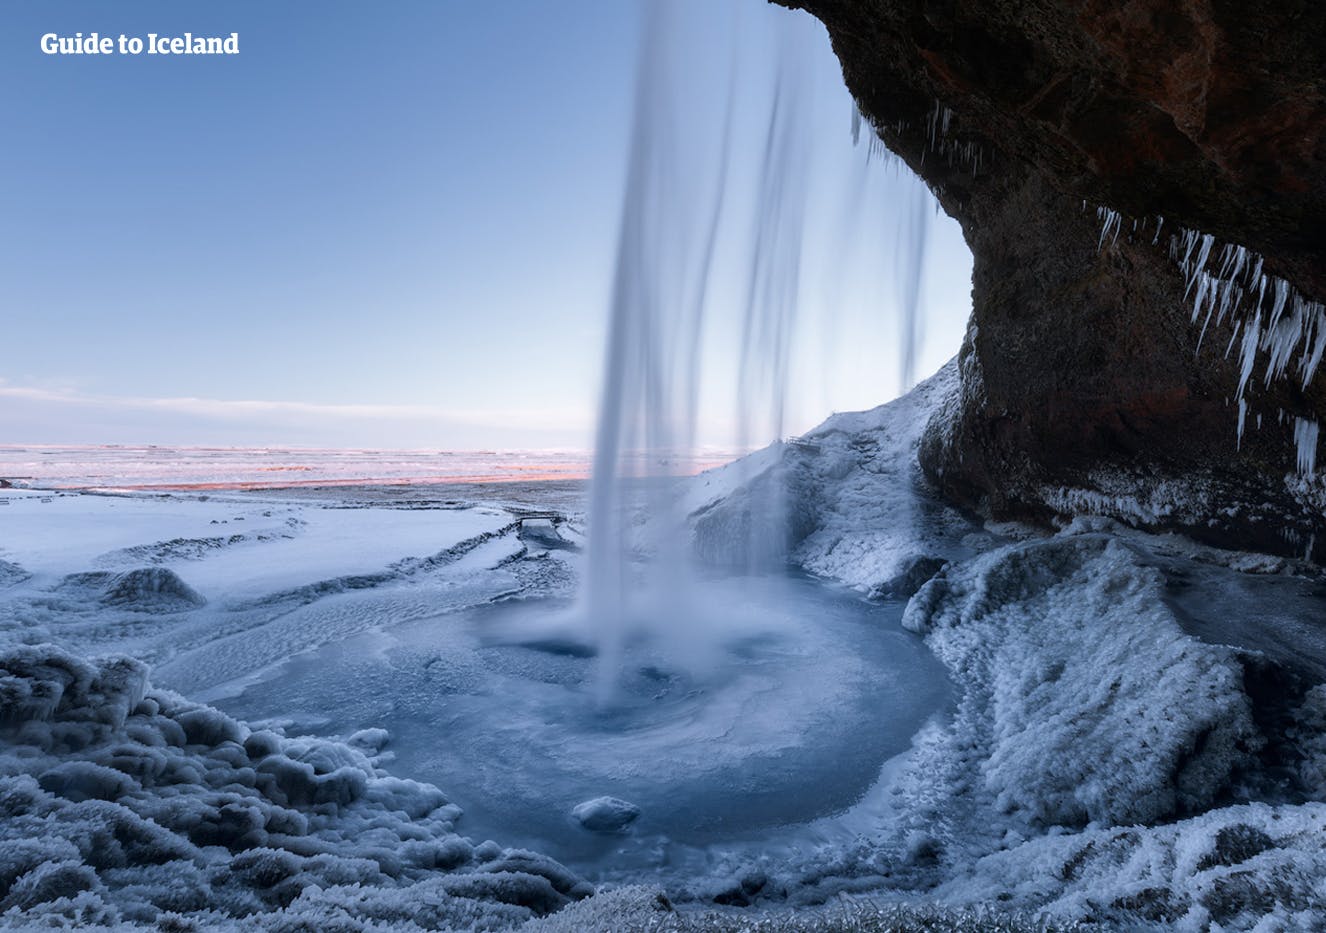 Seljalandsfoss waterfall on the South Coast, pictured here blanketed in snow.